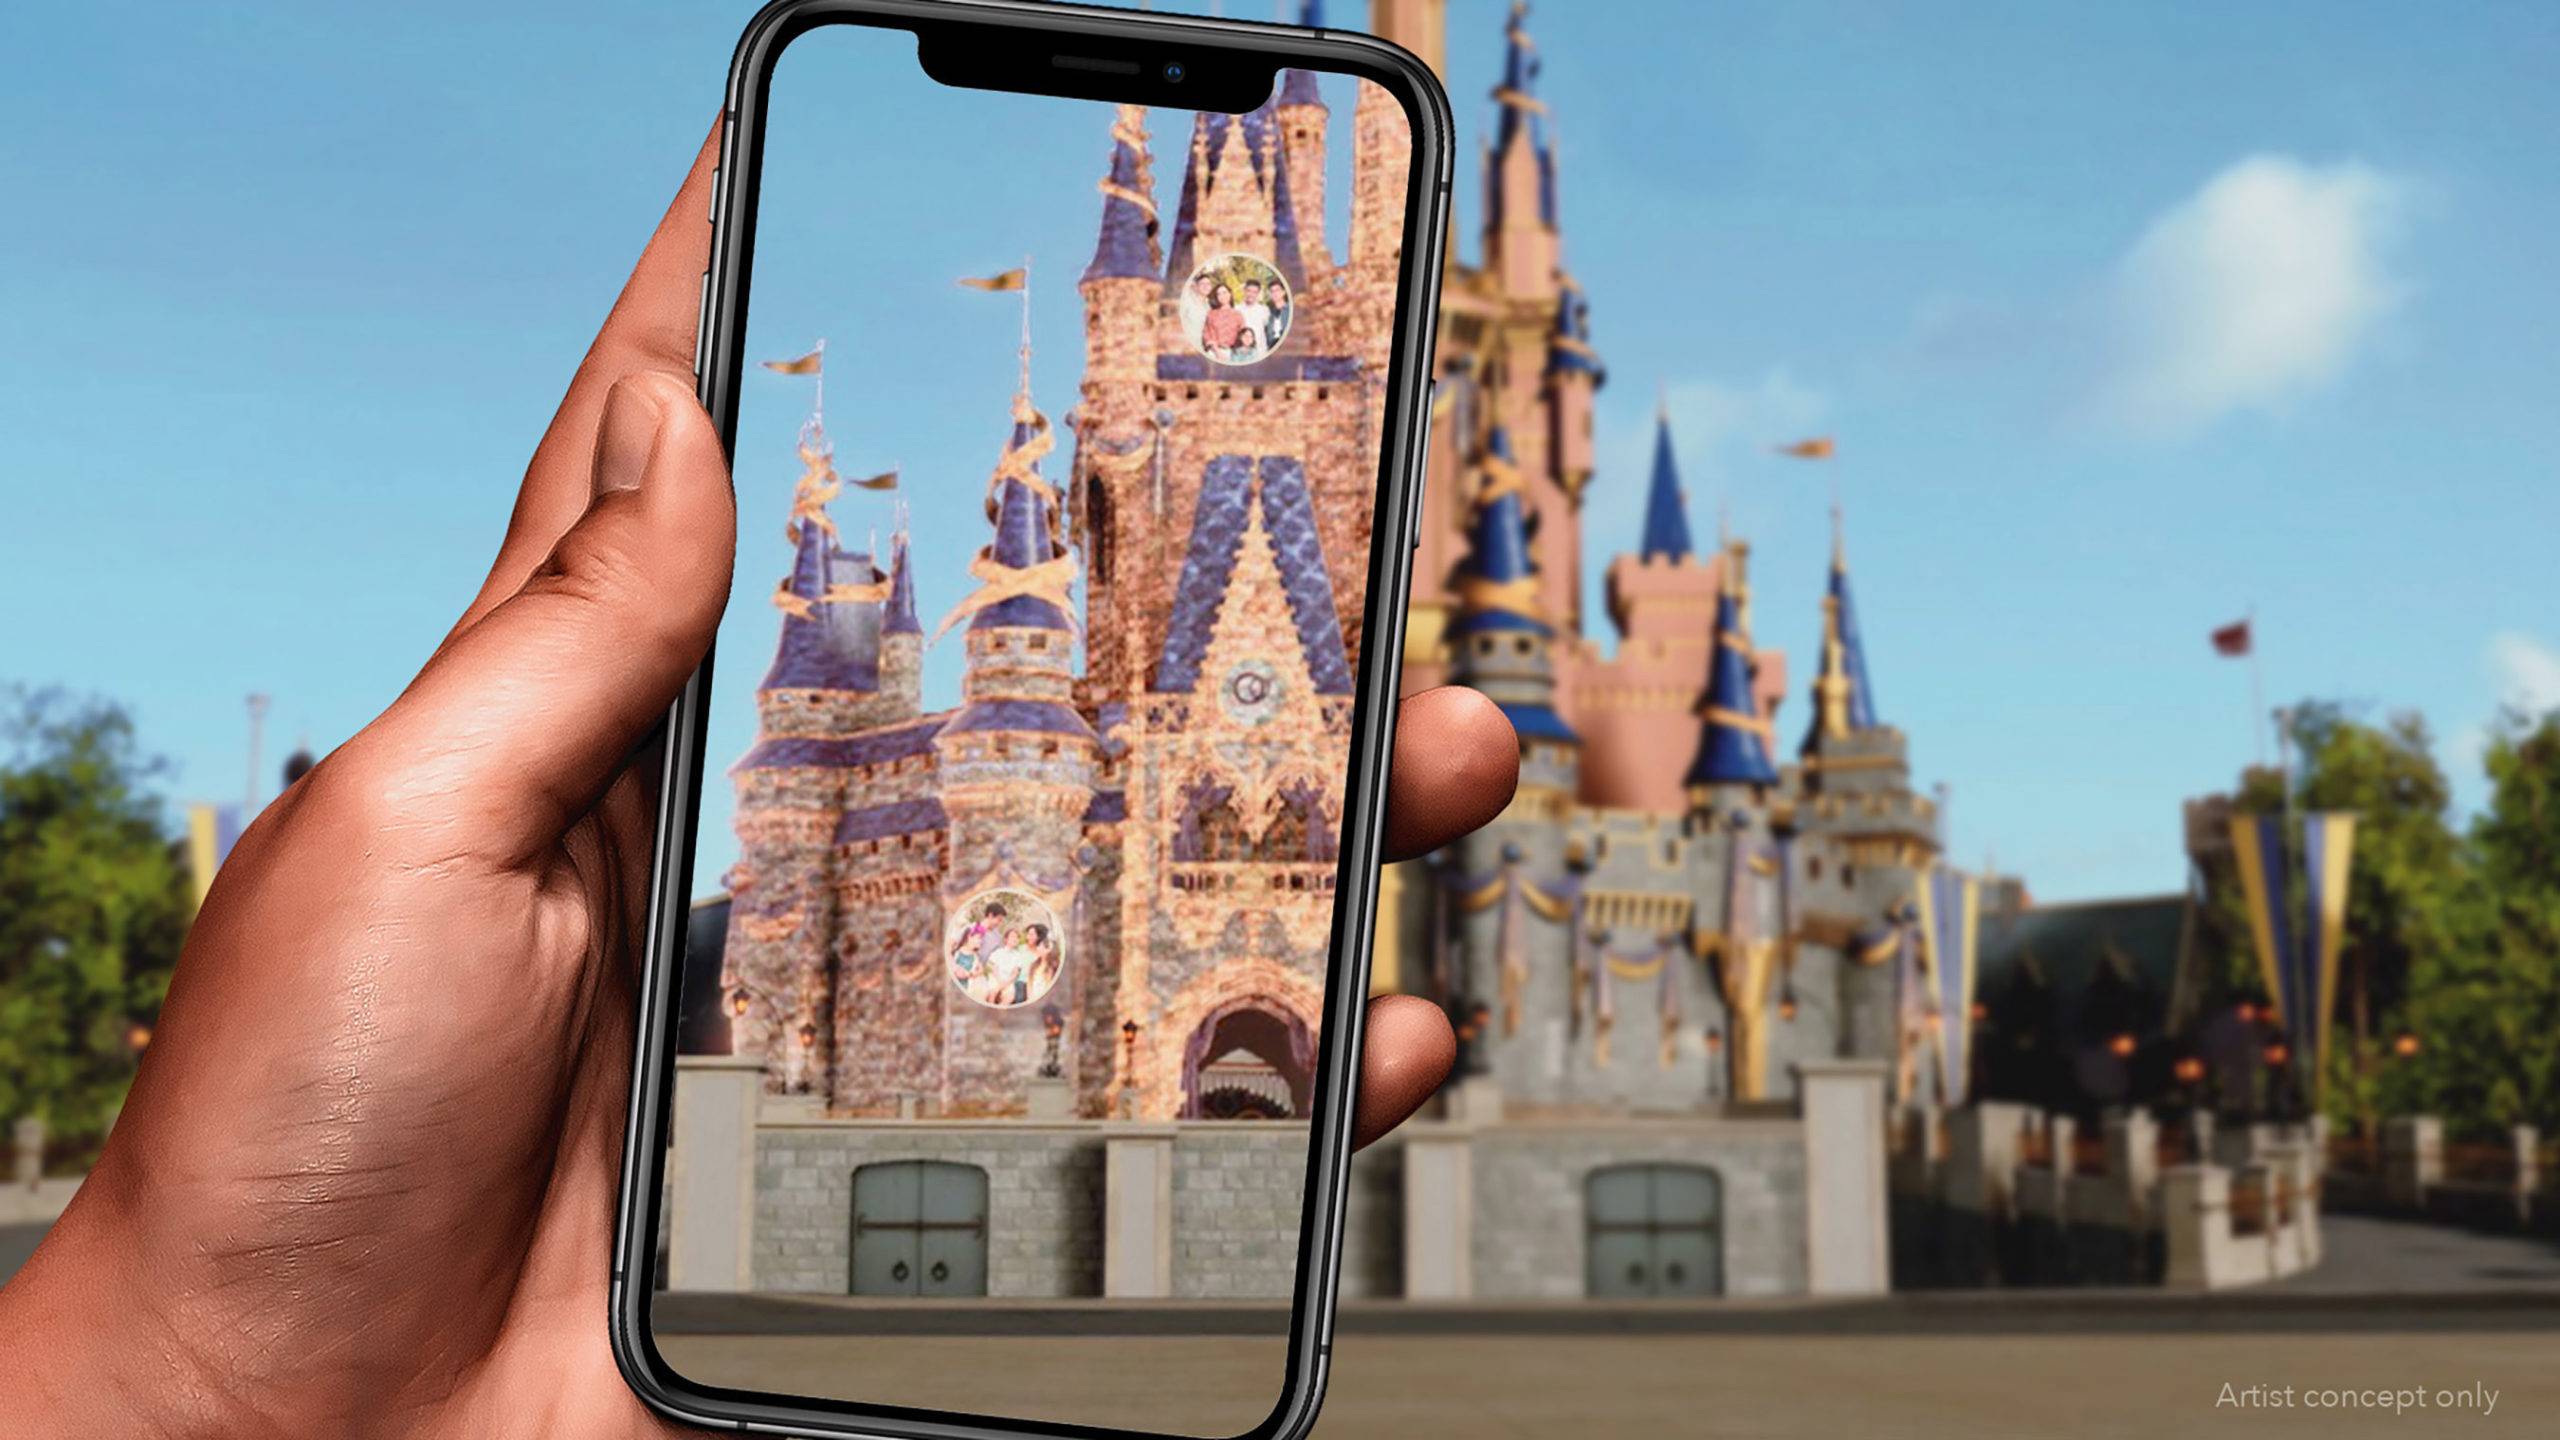 Disney World and Snapchat will virtually transform Cinderella Castle with your PhotoPass images via augmented reality